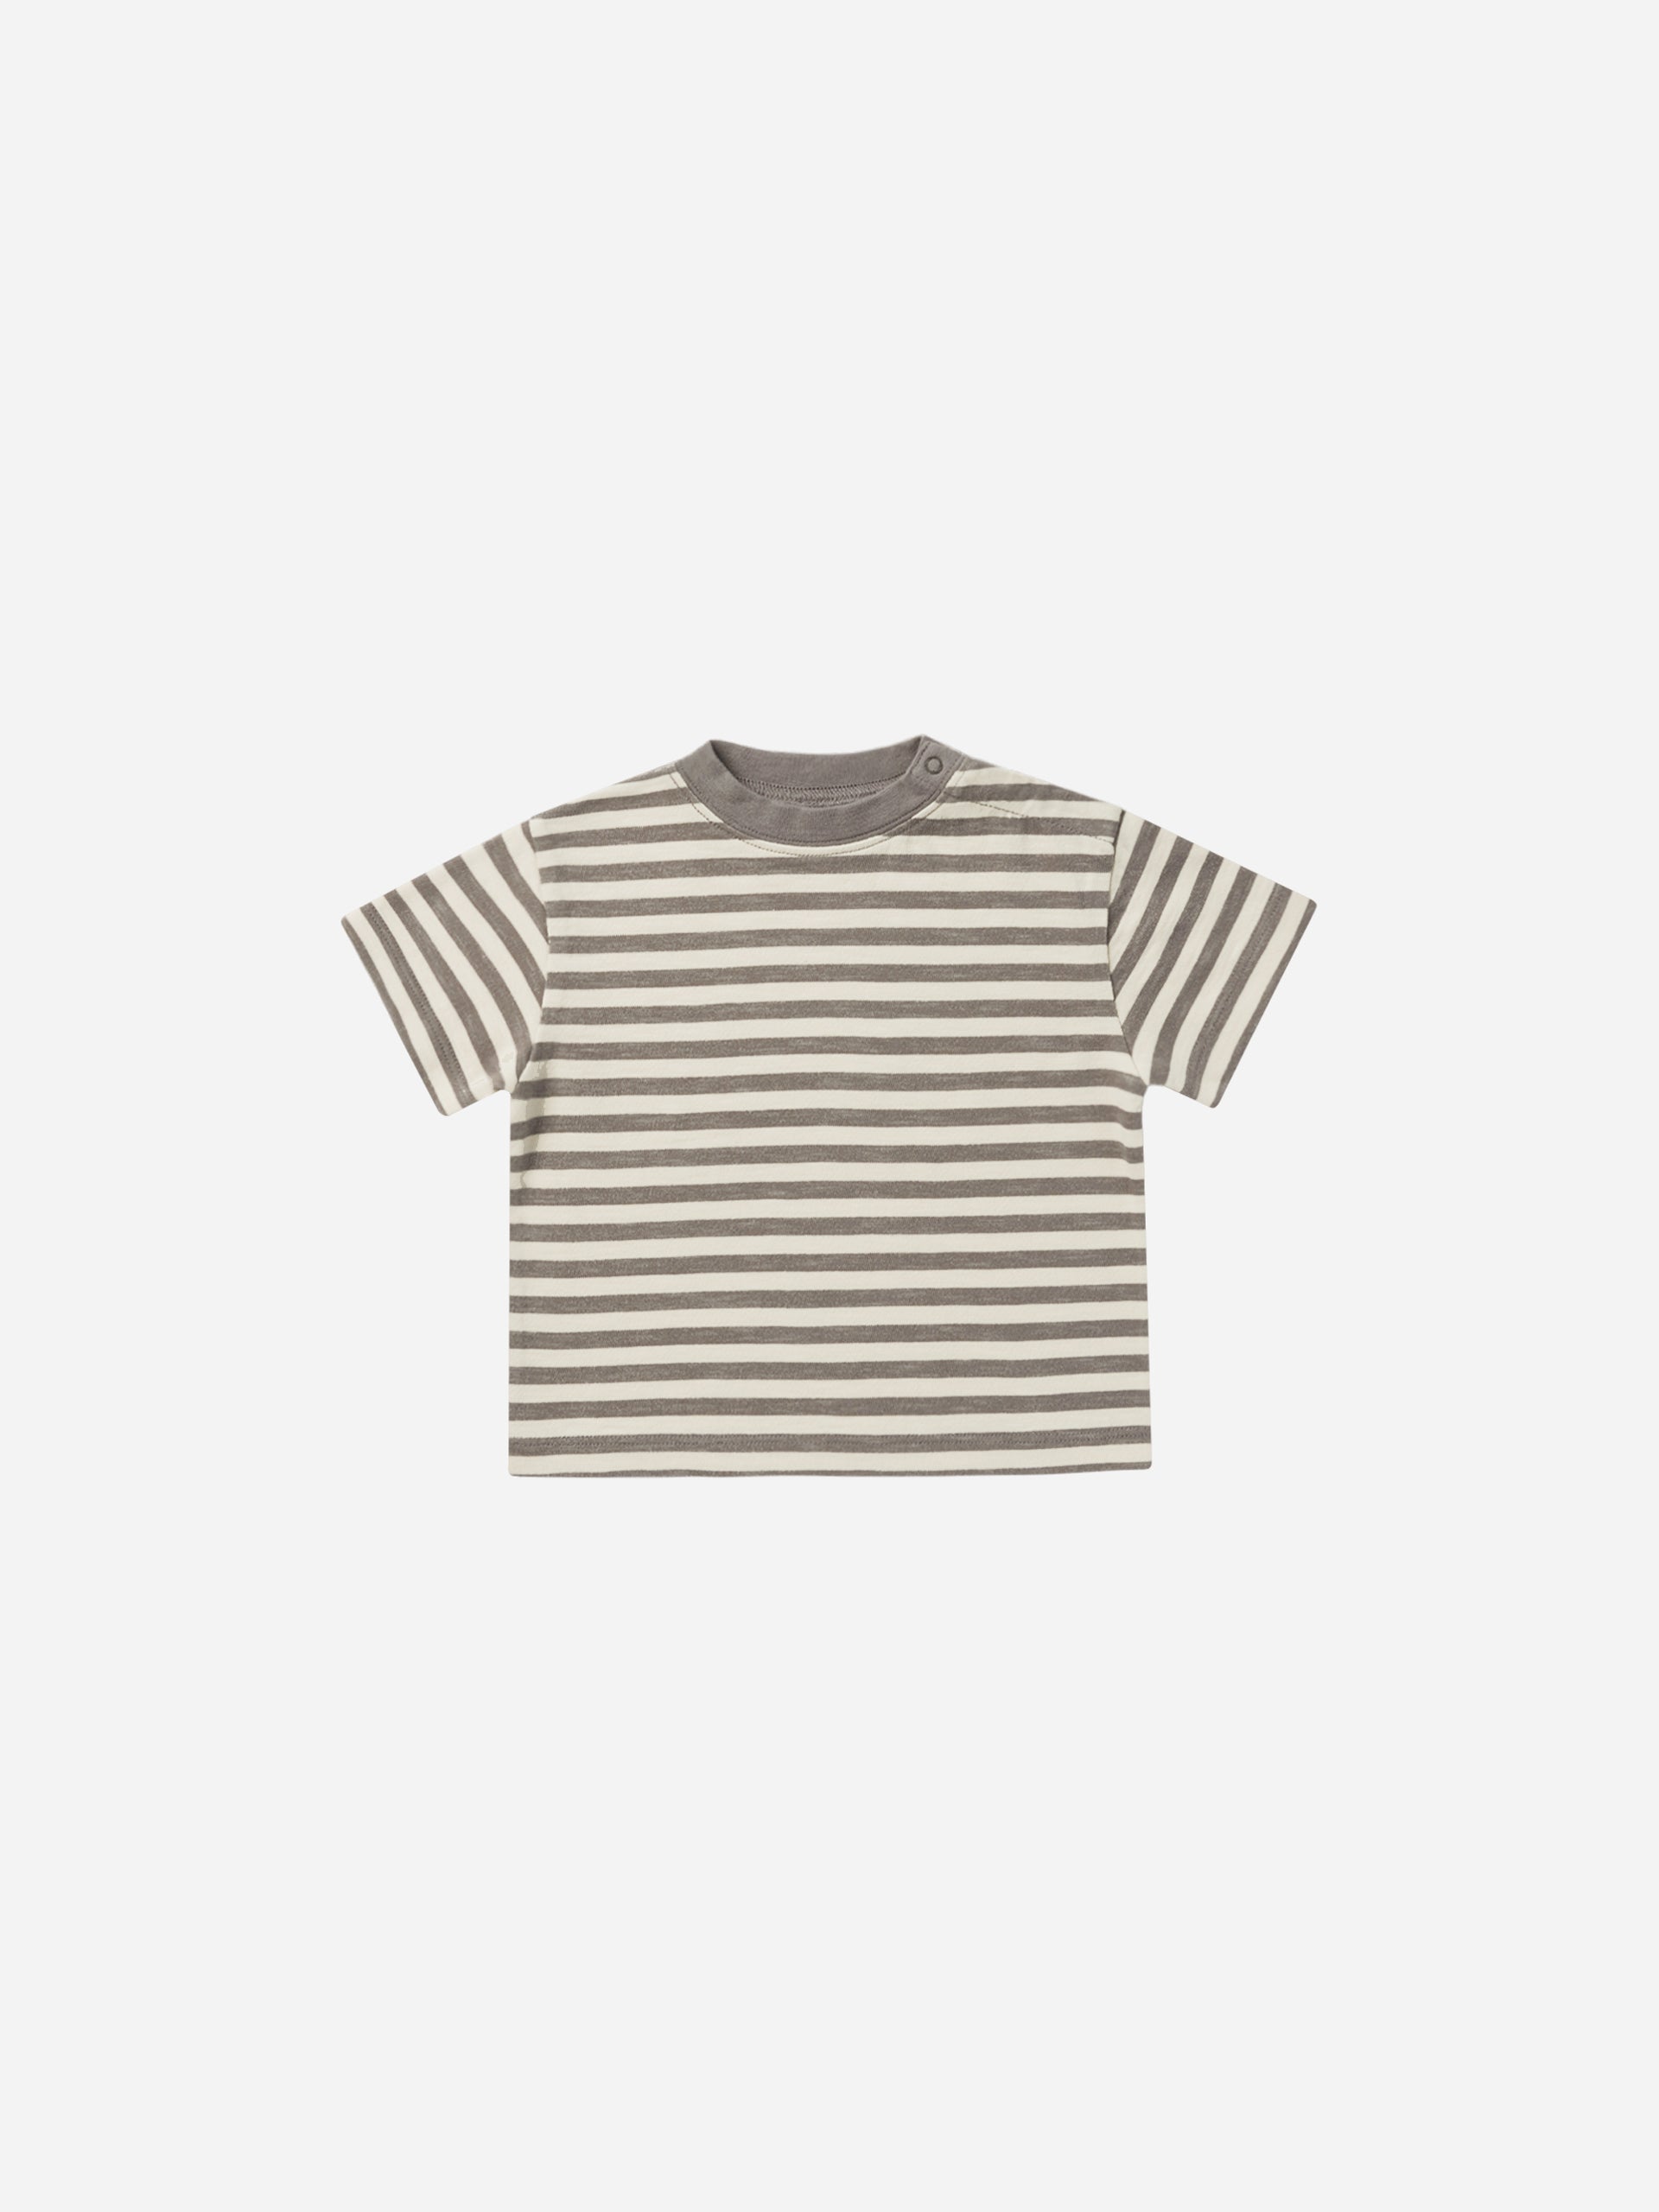 Relaxed Tee || Charcoal Stripe - Rylee + Cru | Kids Clothes | Trendy Baby Clothes | Modern Infant Outfits |